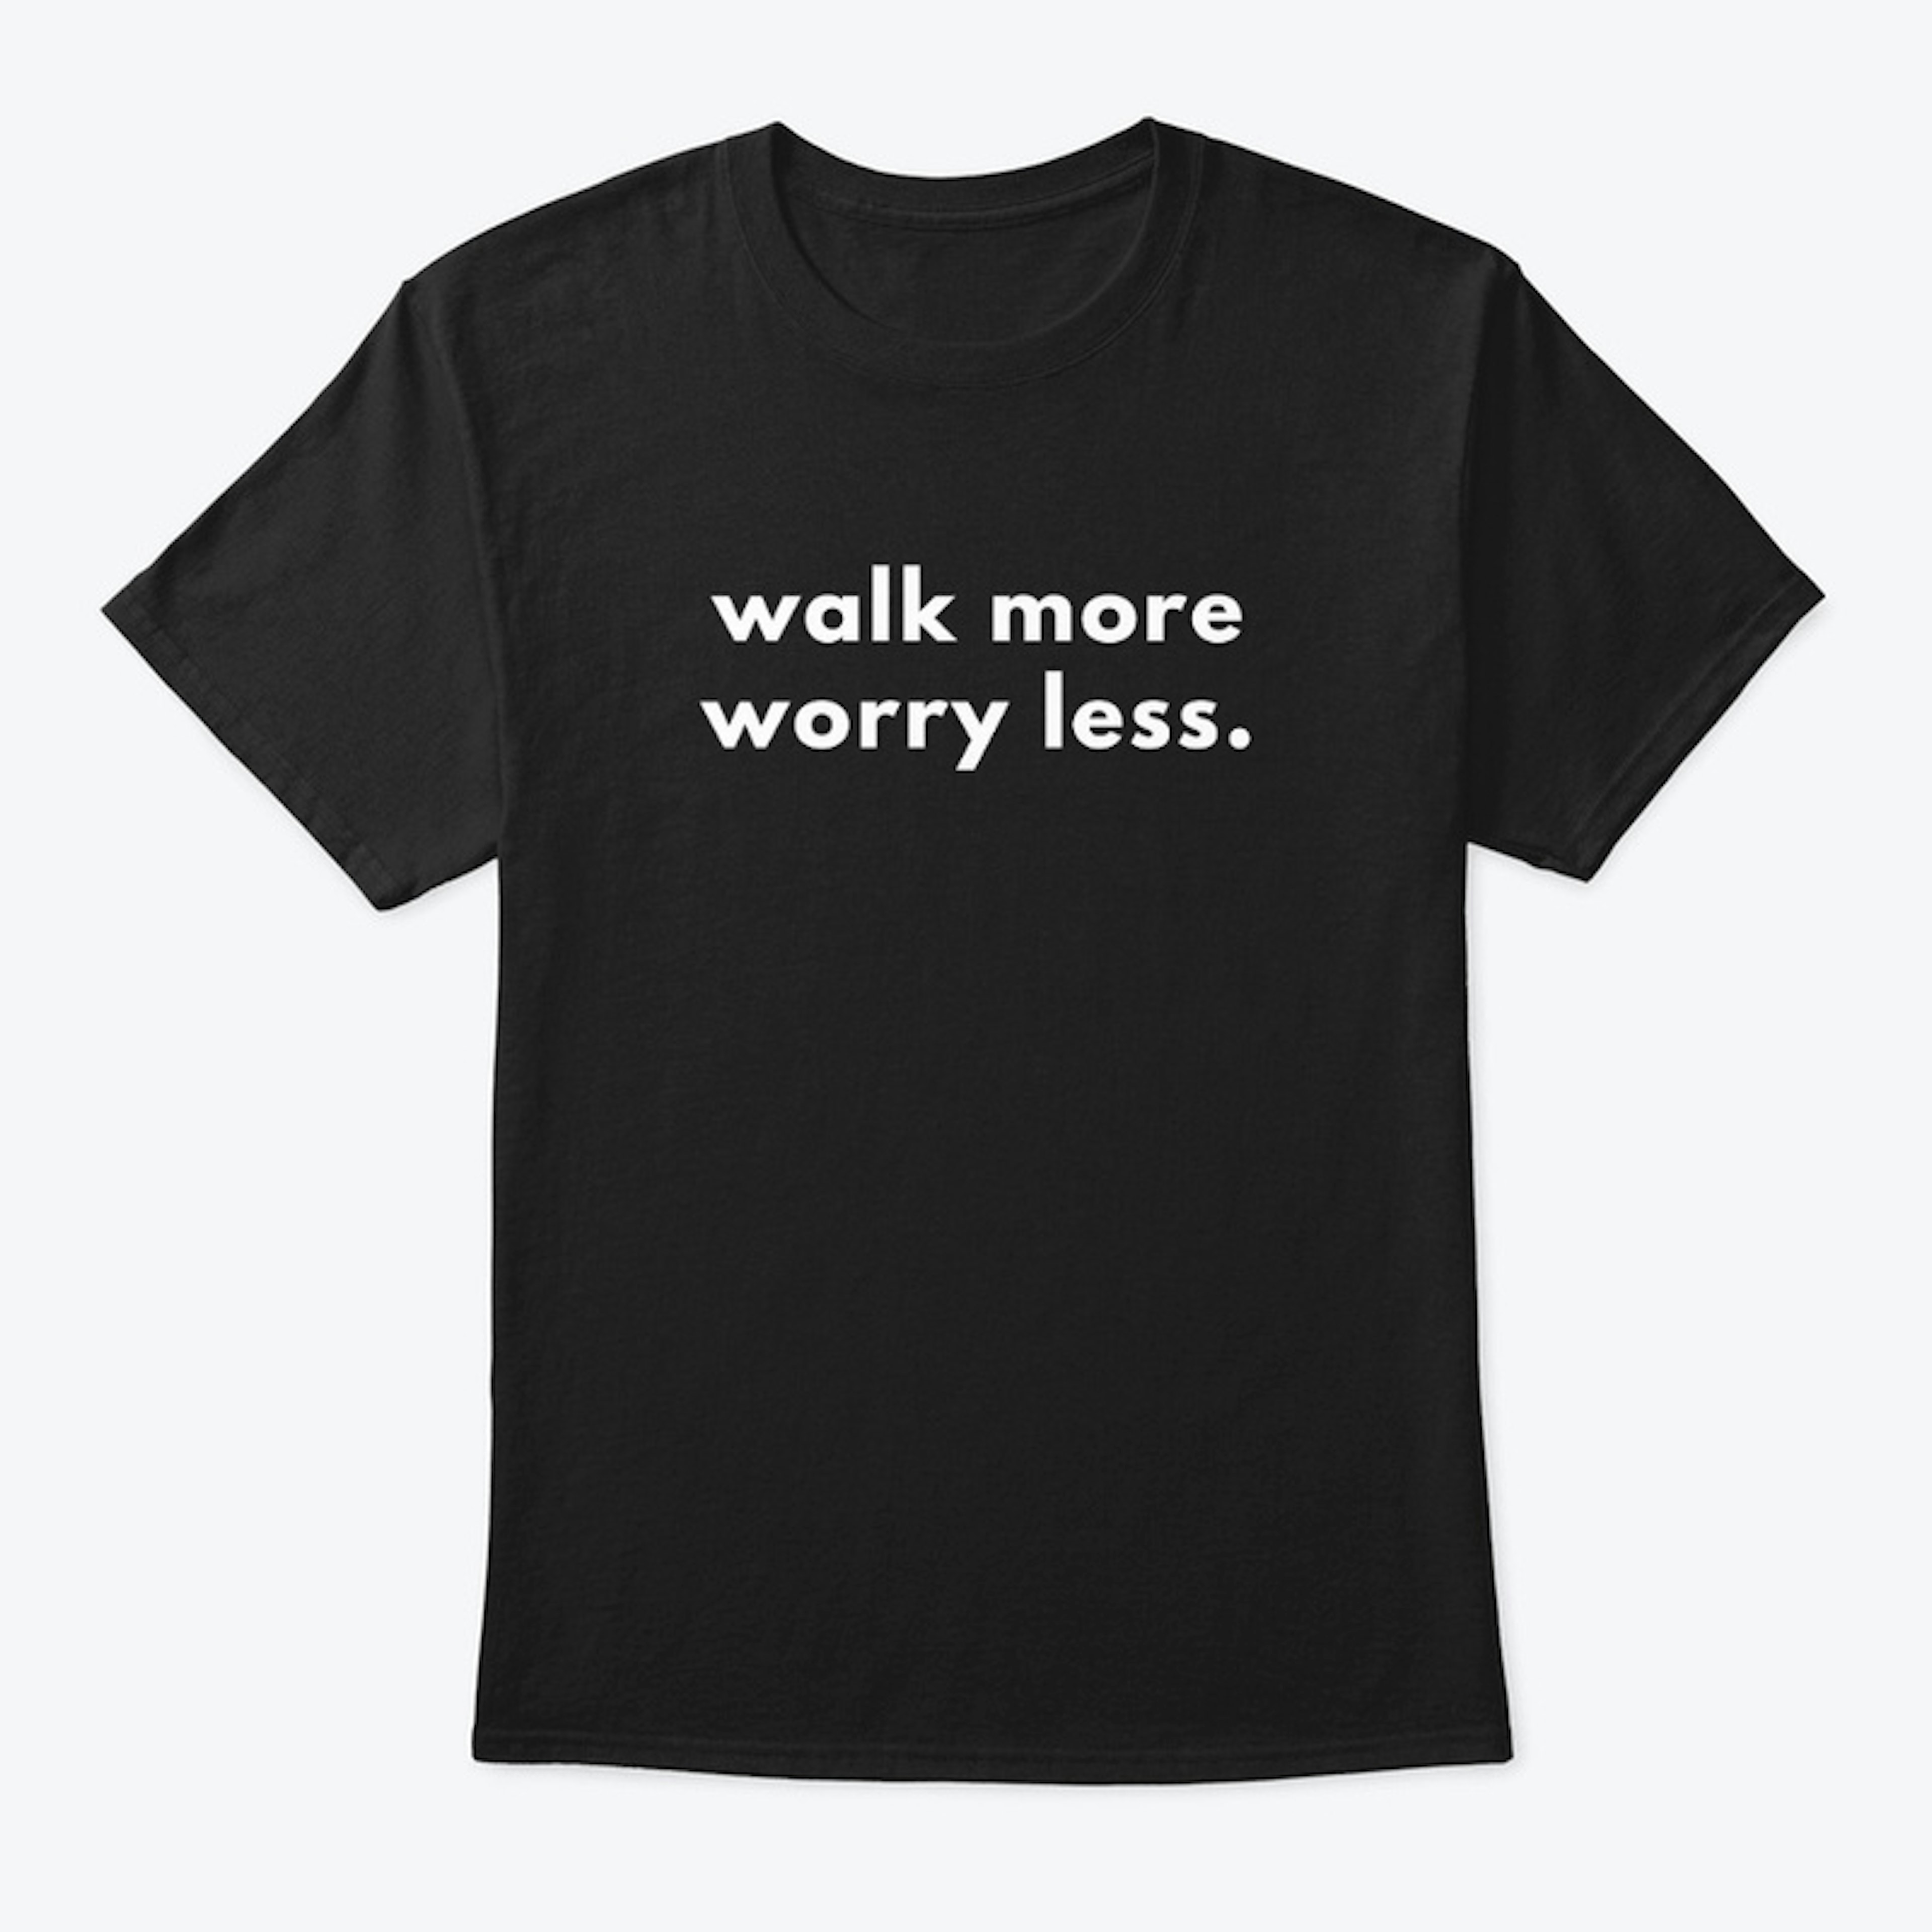 walk more worry less